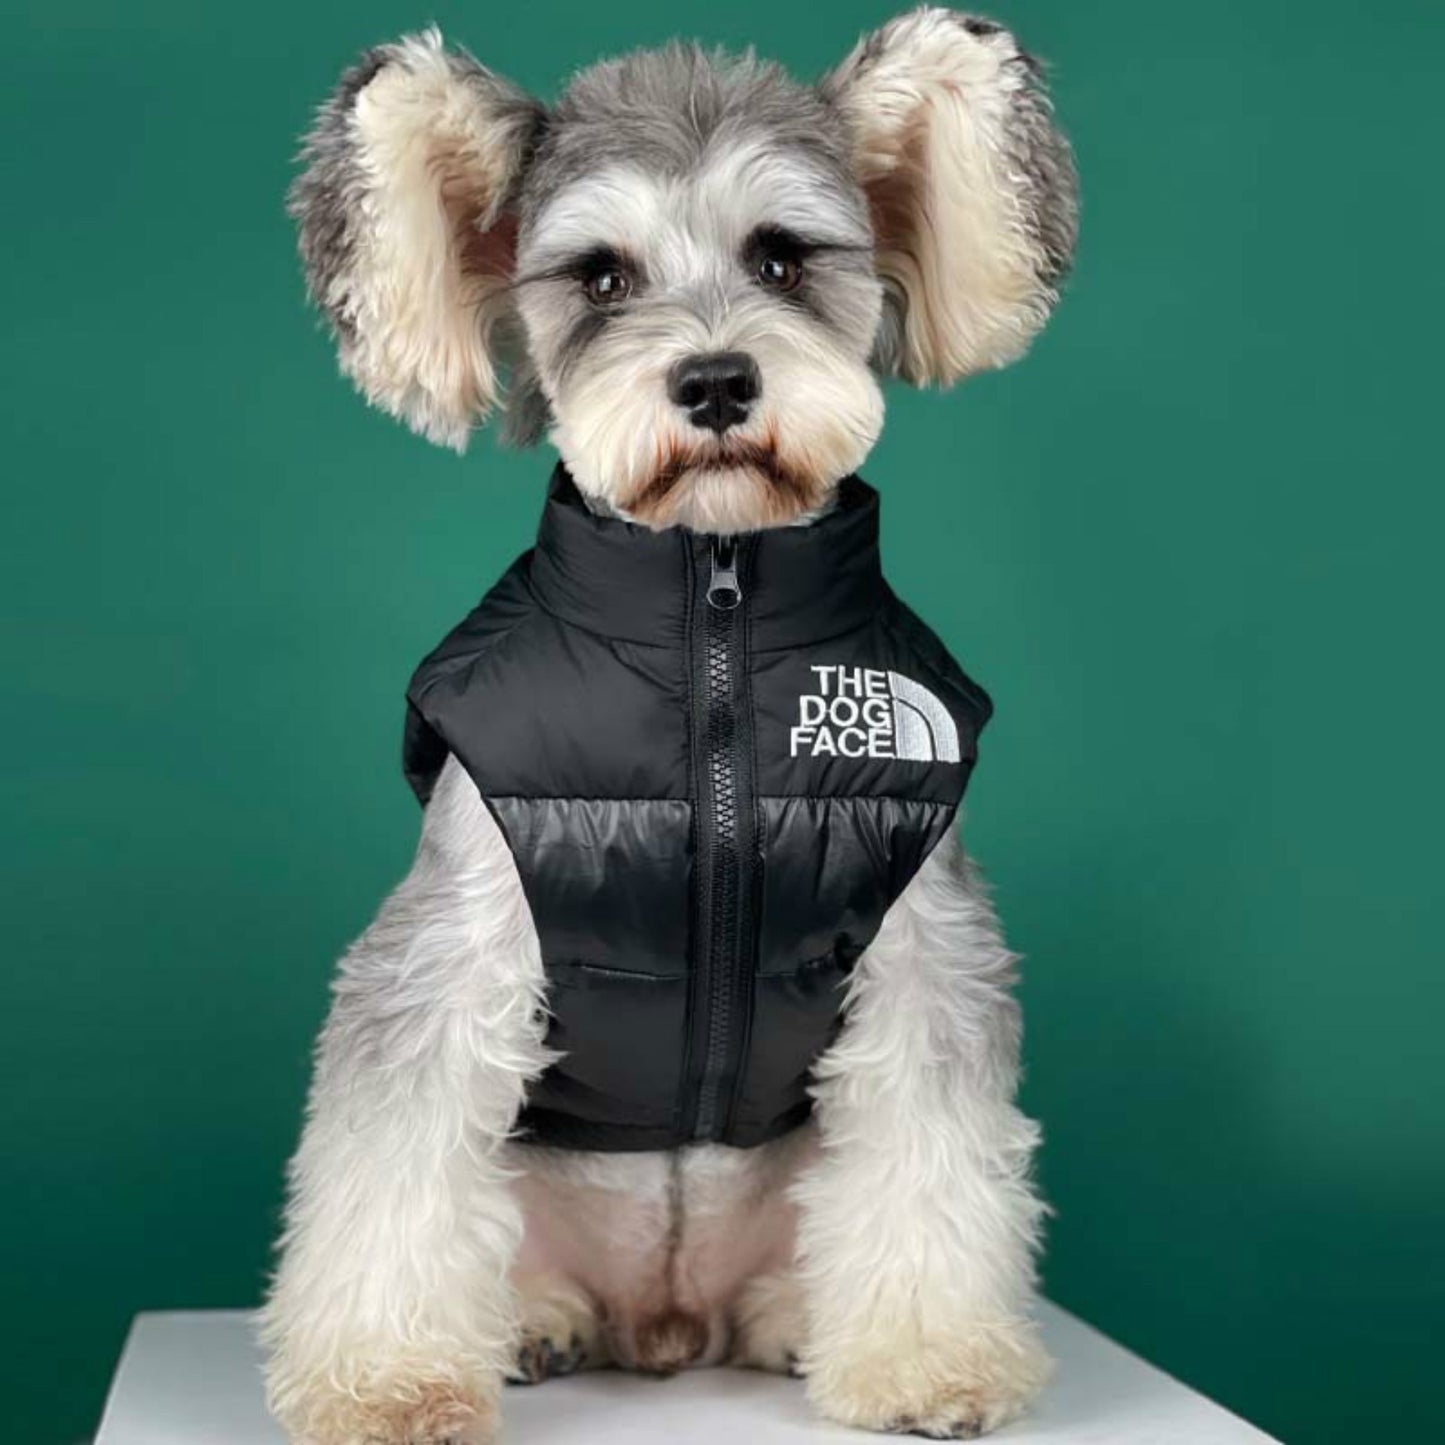 The Dog Face Winter Pet Dog Clothes for Small Medium Dogs,Warm Thick White Duck Down Vest, Chihuahua French Bulldog Black Jacket